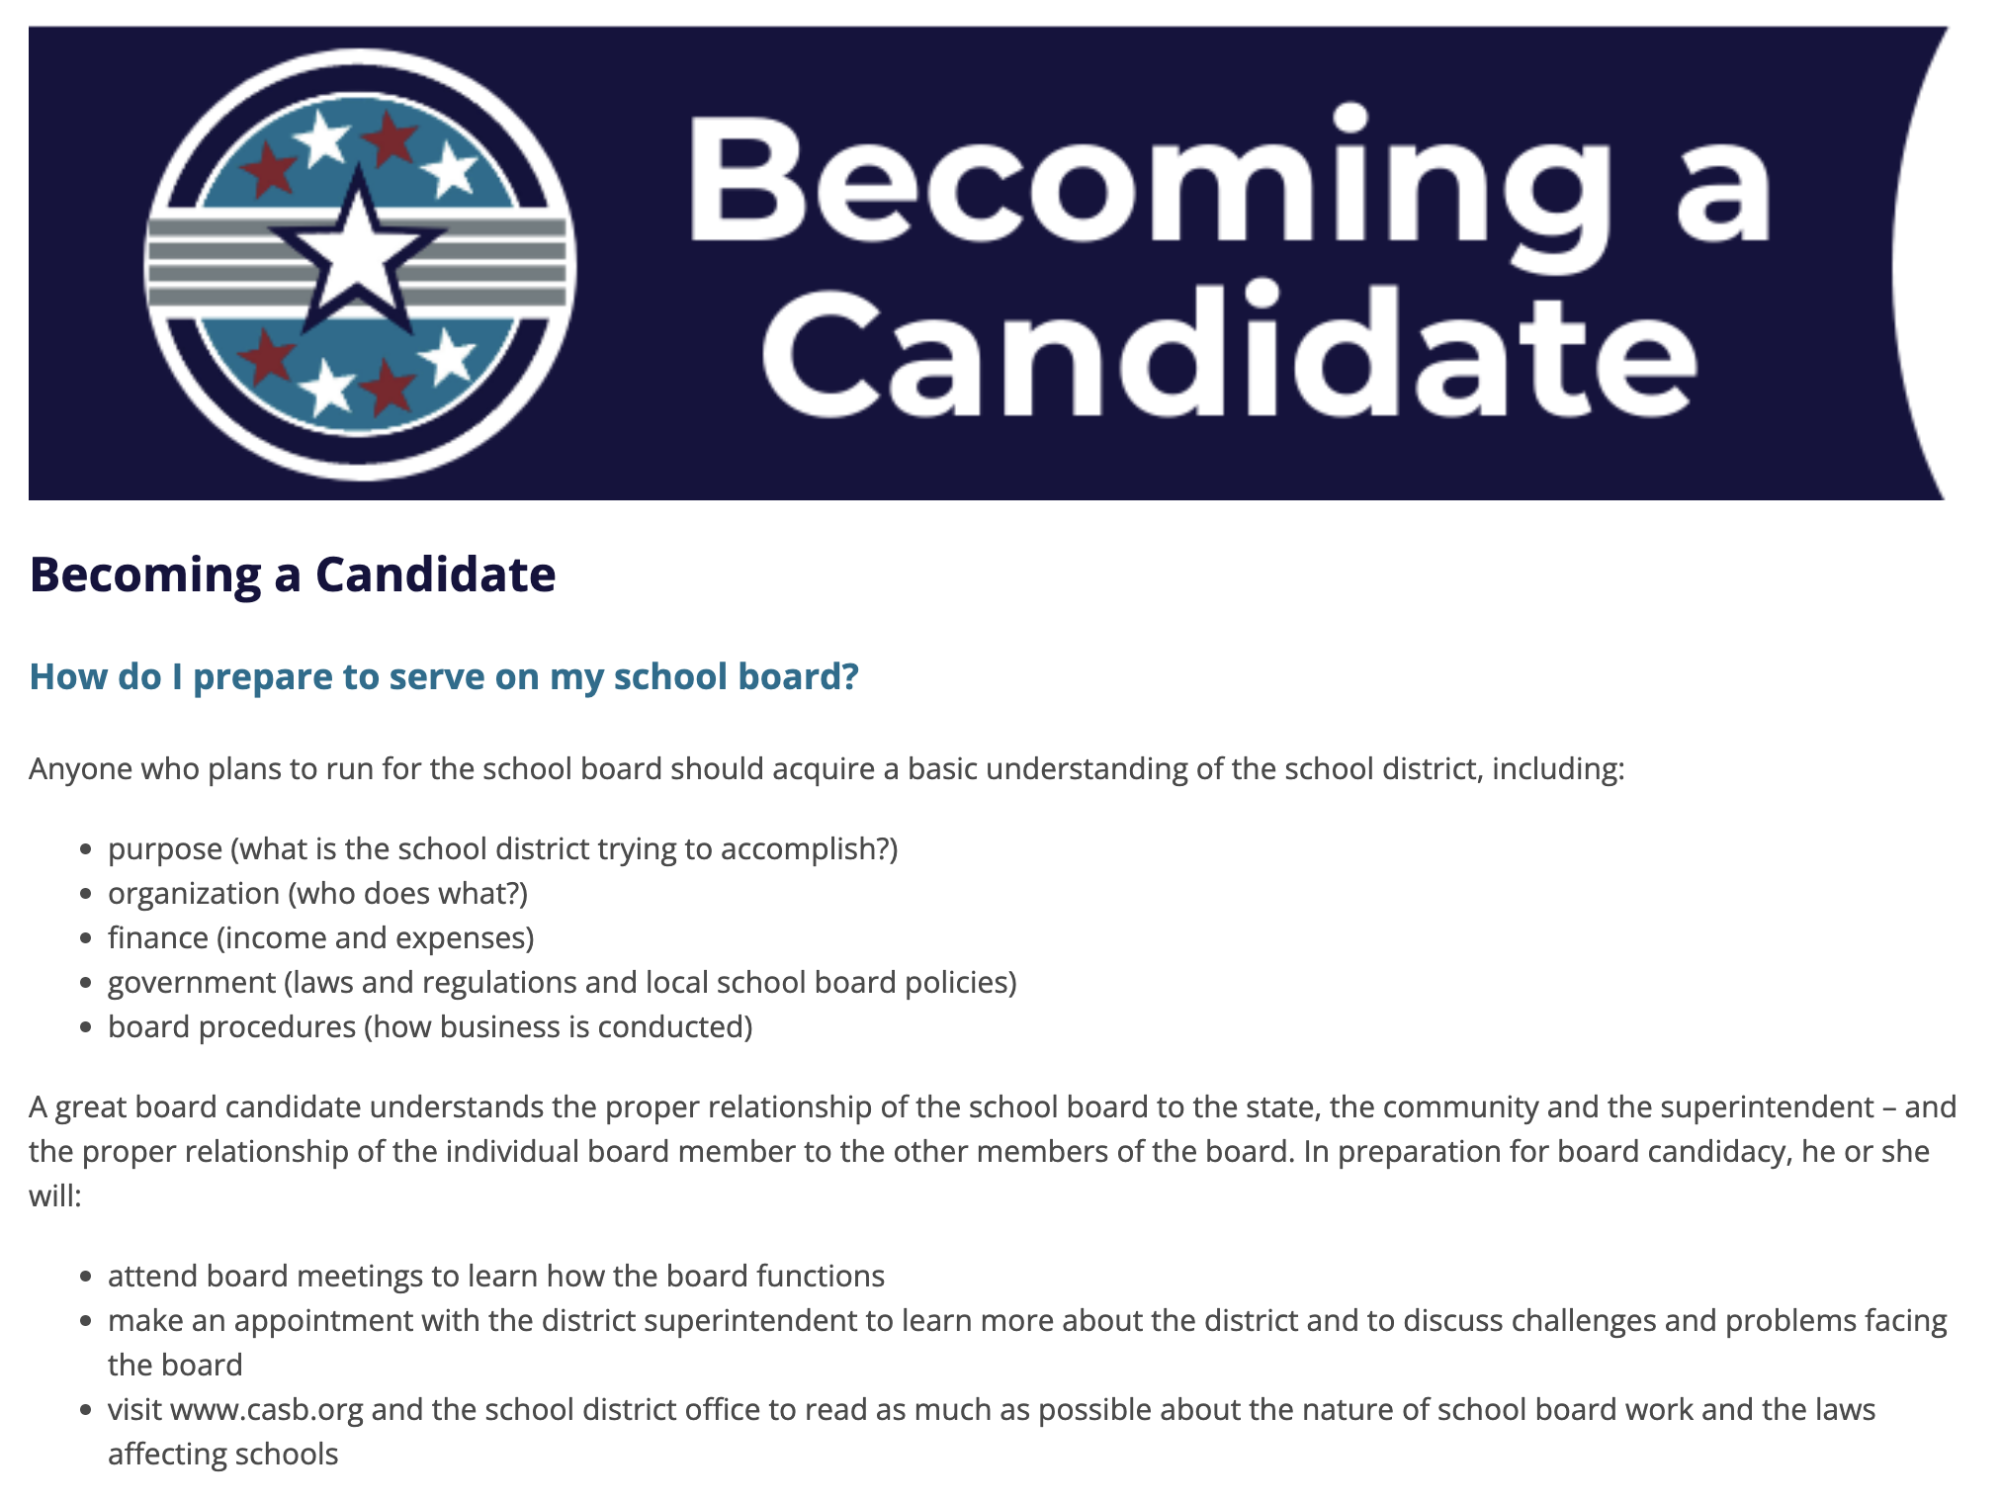 https://www.casb.org/built-to-serve_becoming-a-candidate